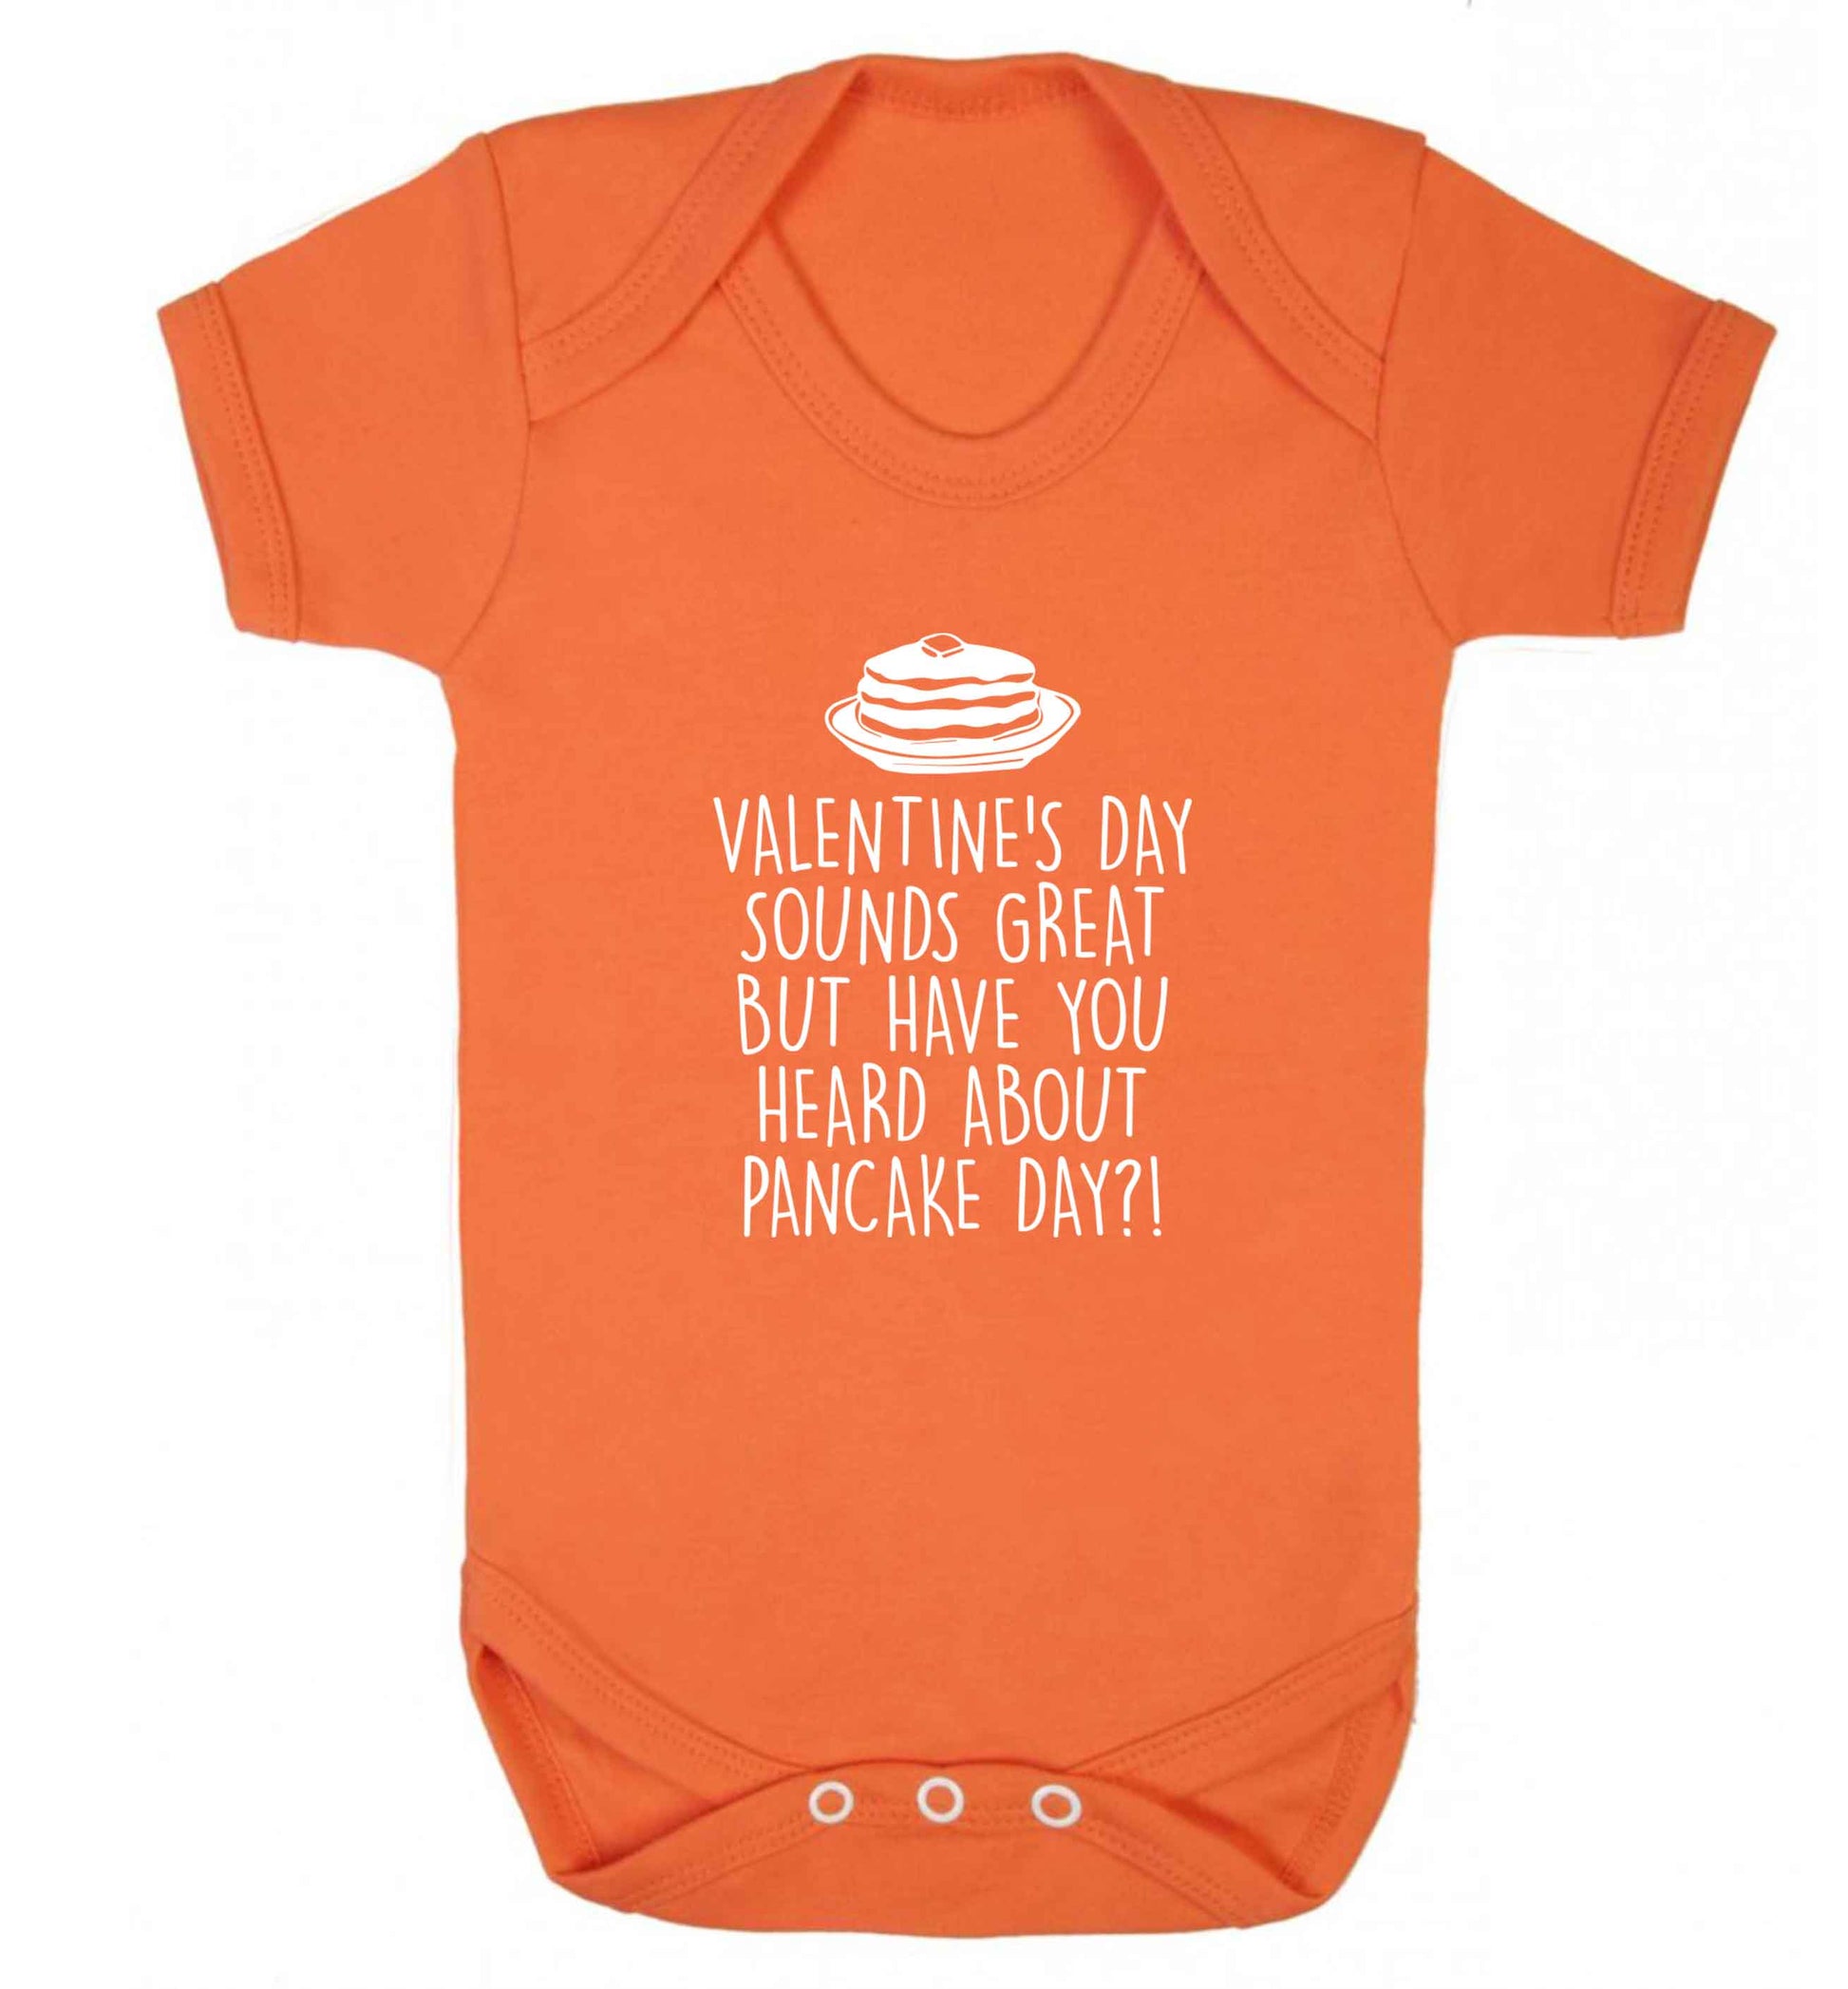 Valentine's day sounds great but have you heard about pancake day?! baby vest orange 18-24 months